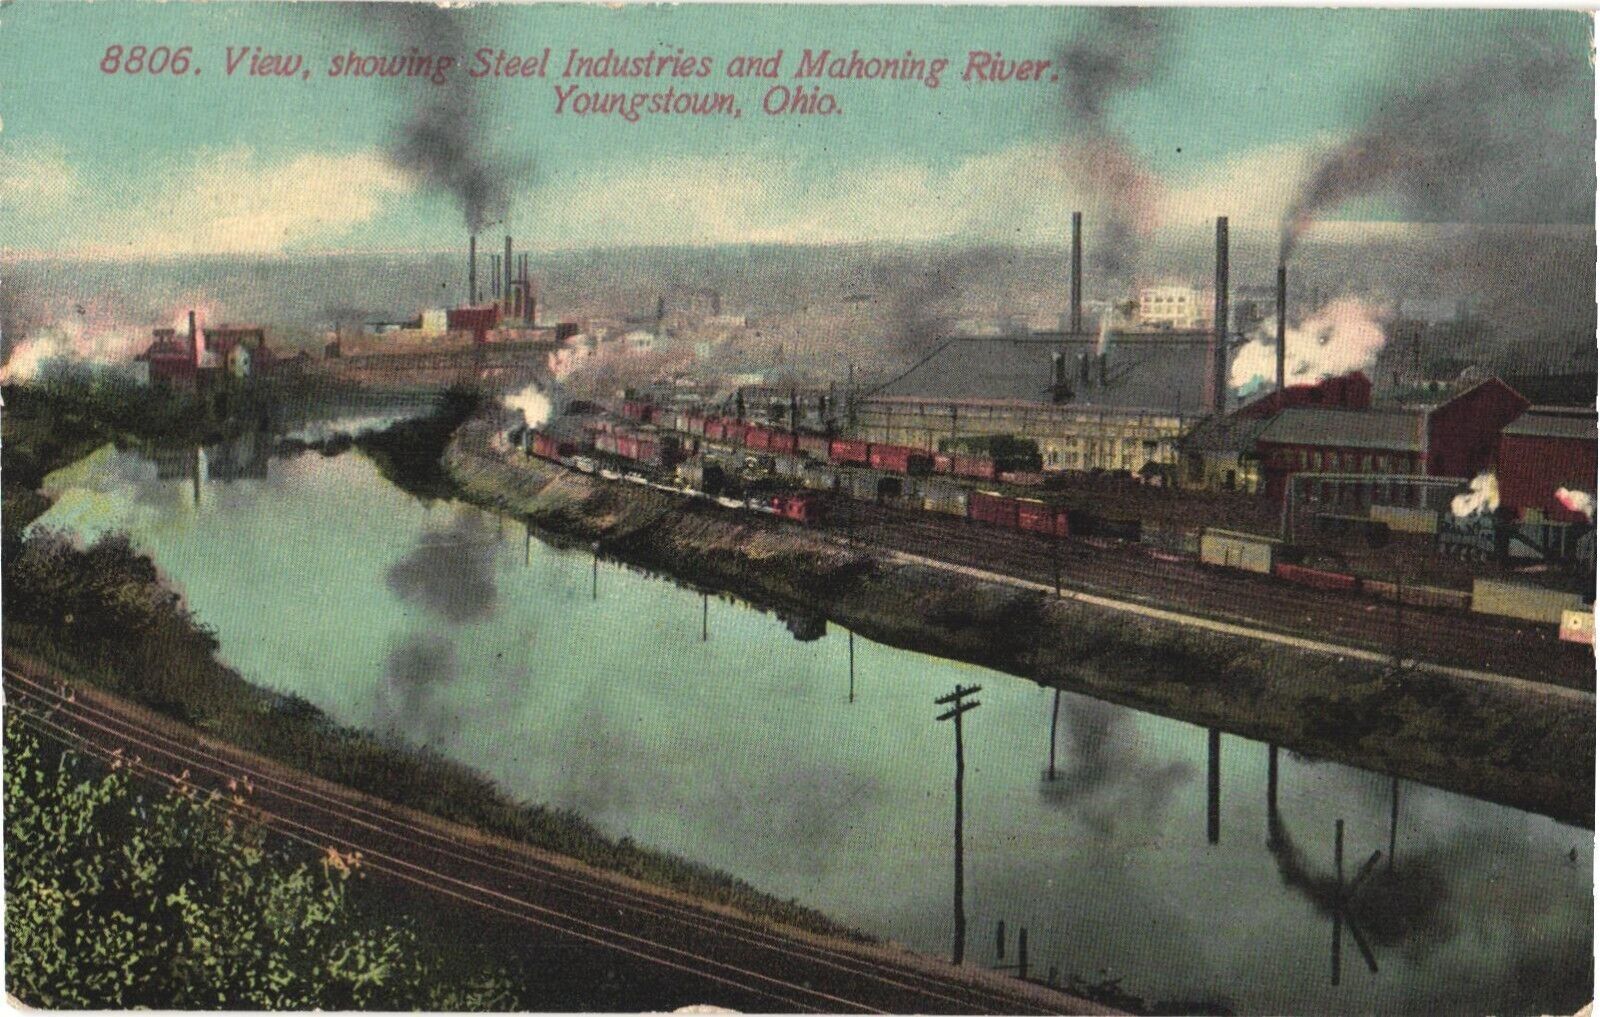 View Showing Steel Industries And Mahoning River, Youngstown, Ohio Postcard